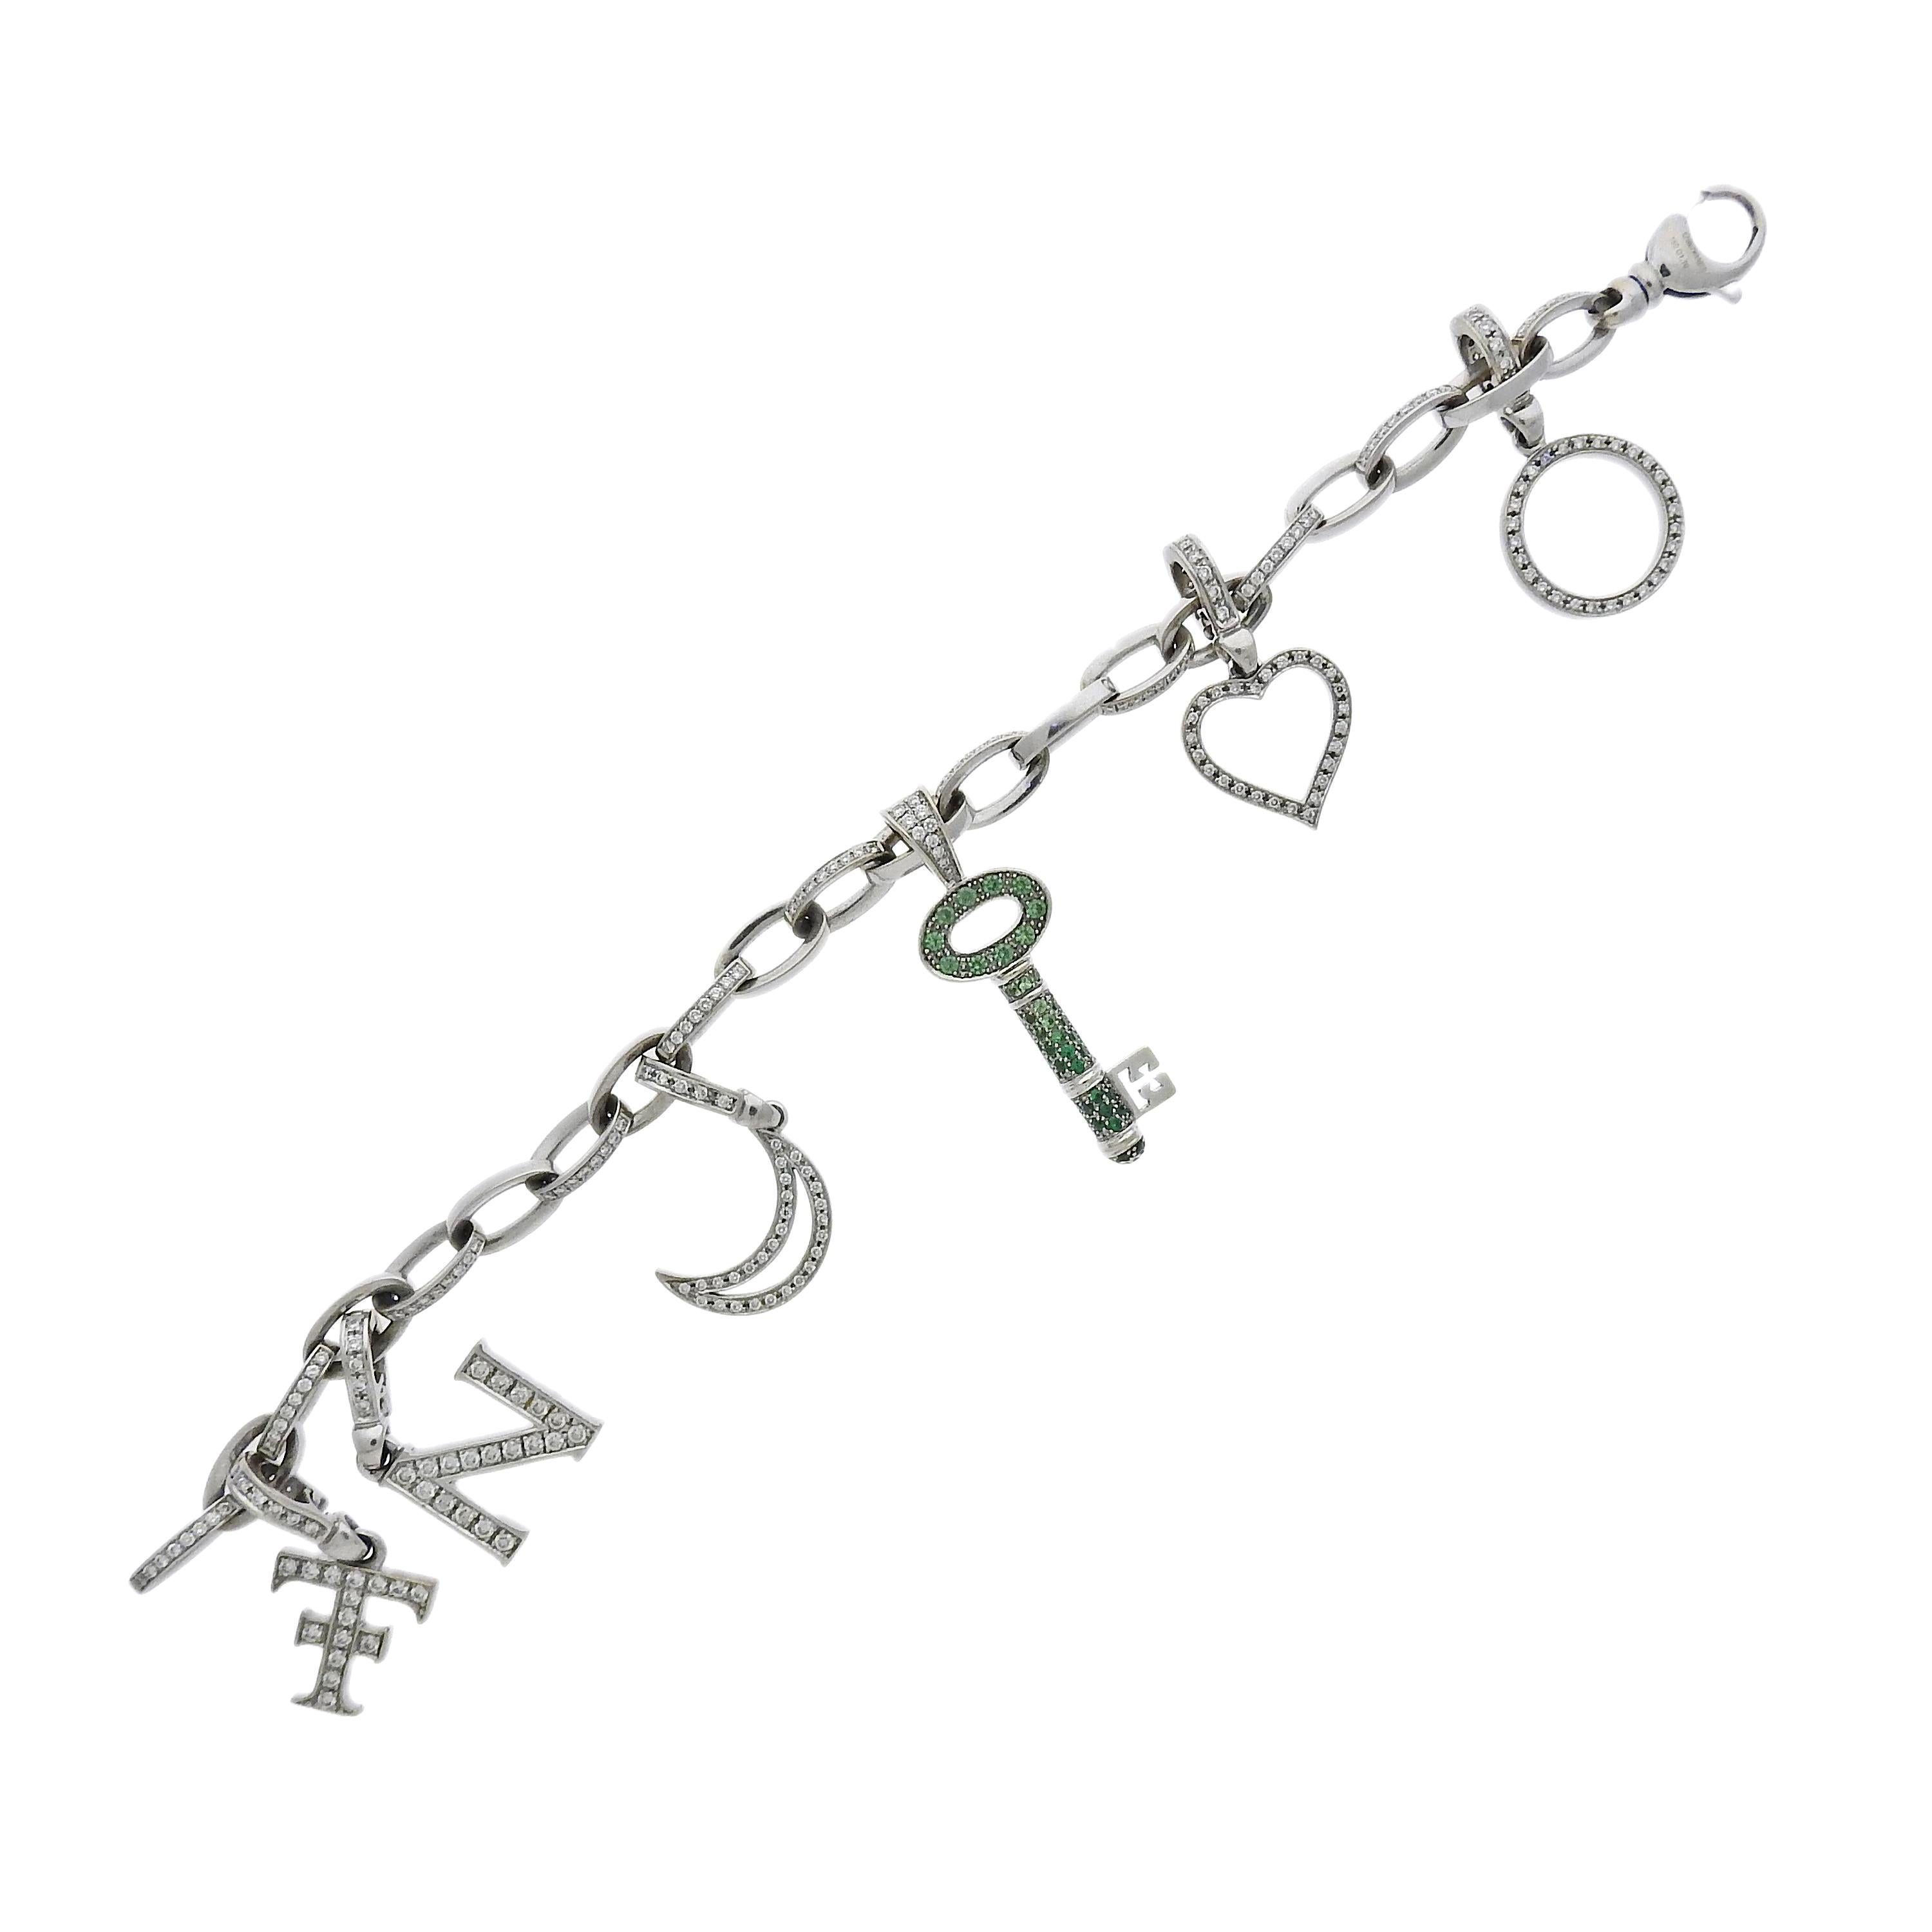 Theo Fennell white gold link charm bracelet features 1.70ctw in SI/GH diamonds, tsavorite. All charms are detachable. Bracelet measures 7 3/4